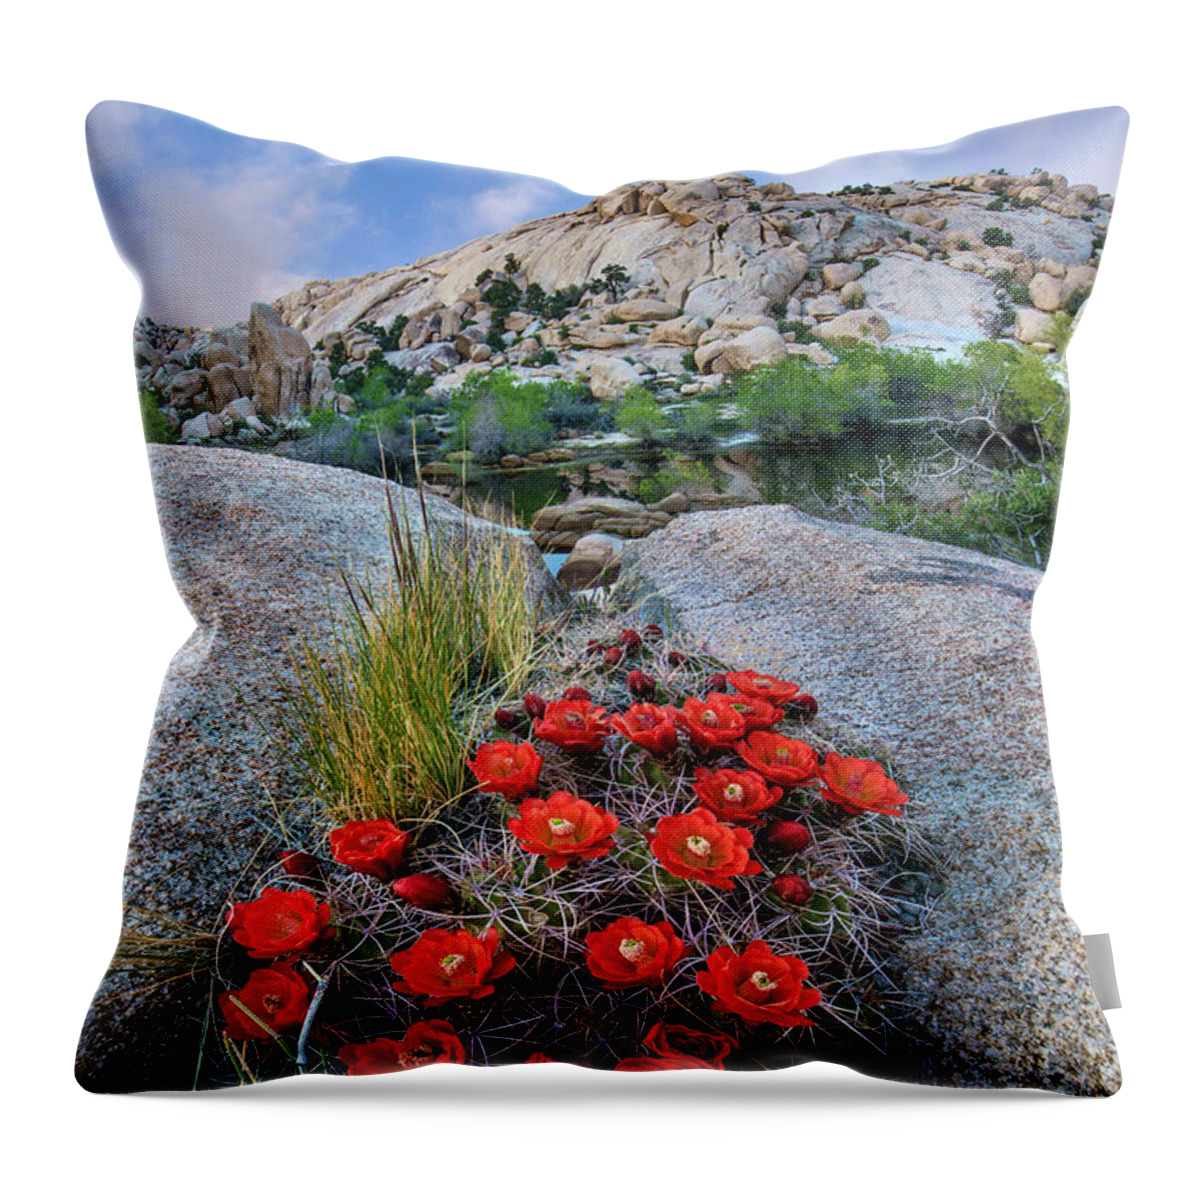 00568636 Throw Pillow featuring the photograph Claret Cup Cactus Near Barker Pond Trail, Joshua Tree National Park, California #1 by Tim Fitzharris